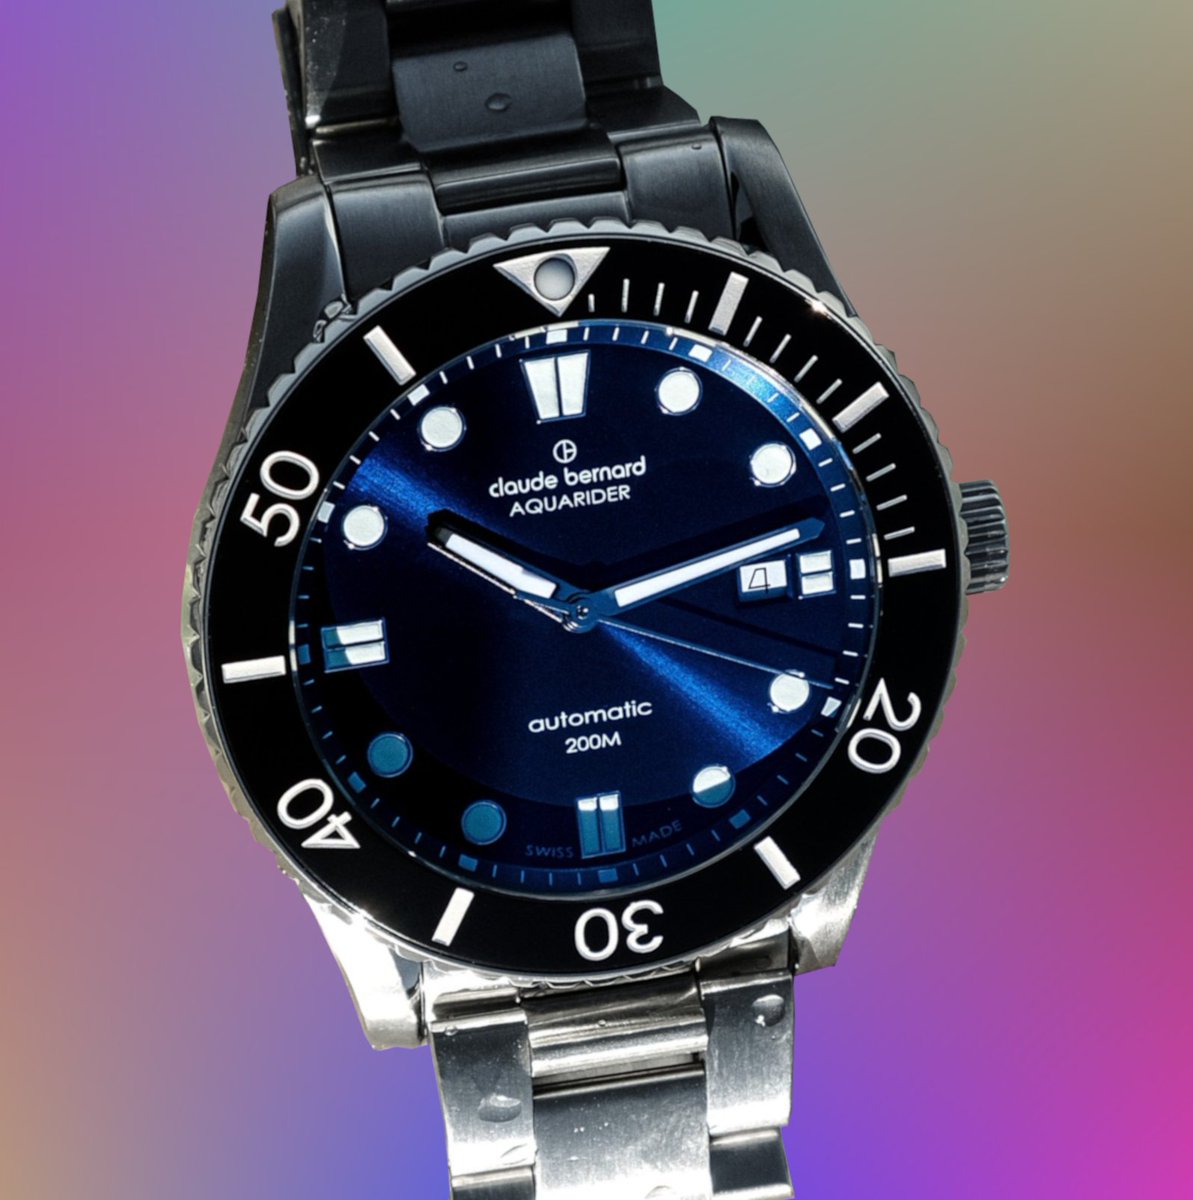 Attention, #WatchCollectors! Don't overlook this concealed treasure in the realm of #DiveWatches: the Aquarider Diver series by @CBswisswatches. A true #SwissMade beauty that seamlessly blends style and affordabibility with a classy and elegant look that's adventure ready.